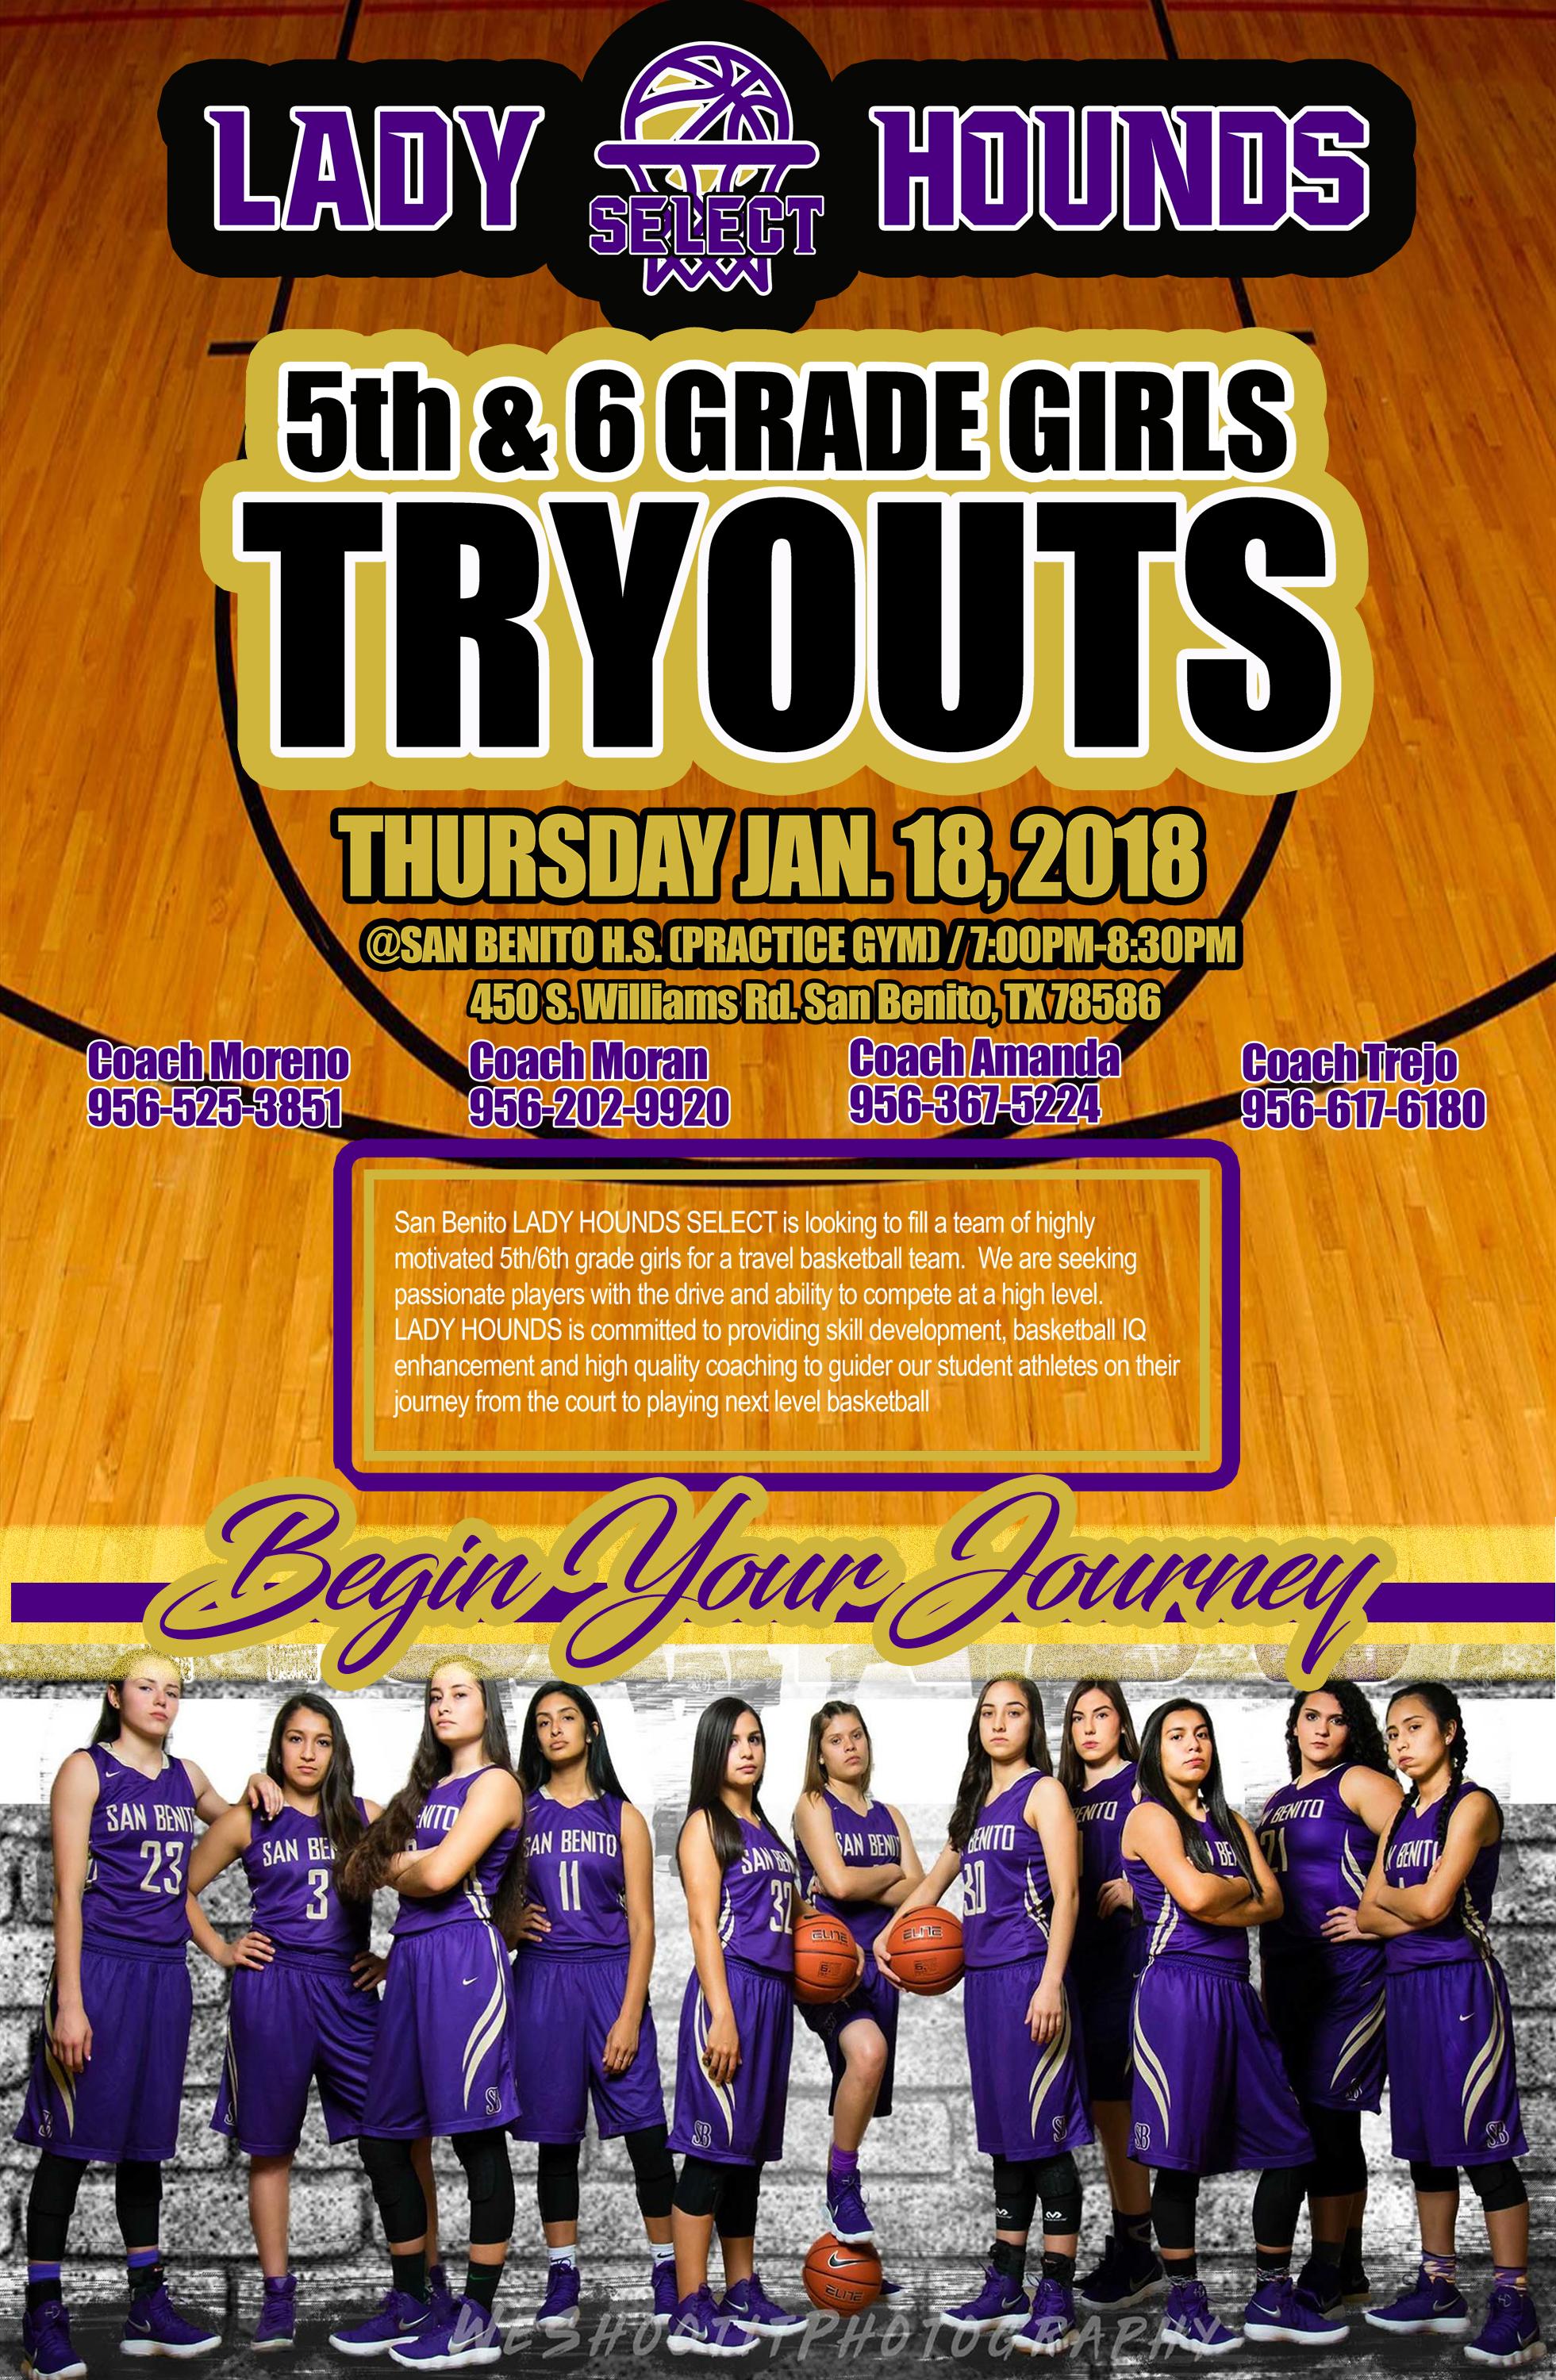 5th & 6th Grade Girls Tryouts Flyer